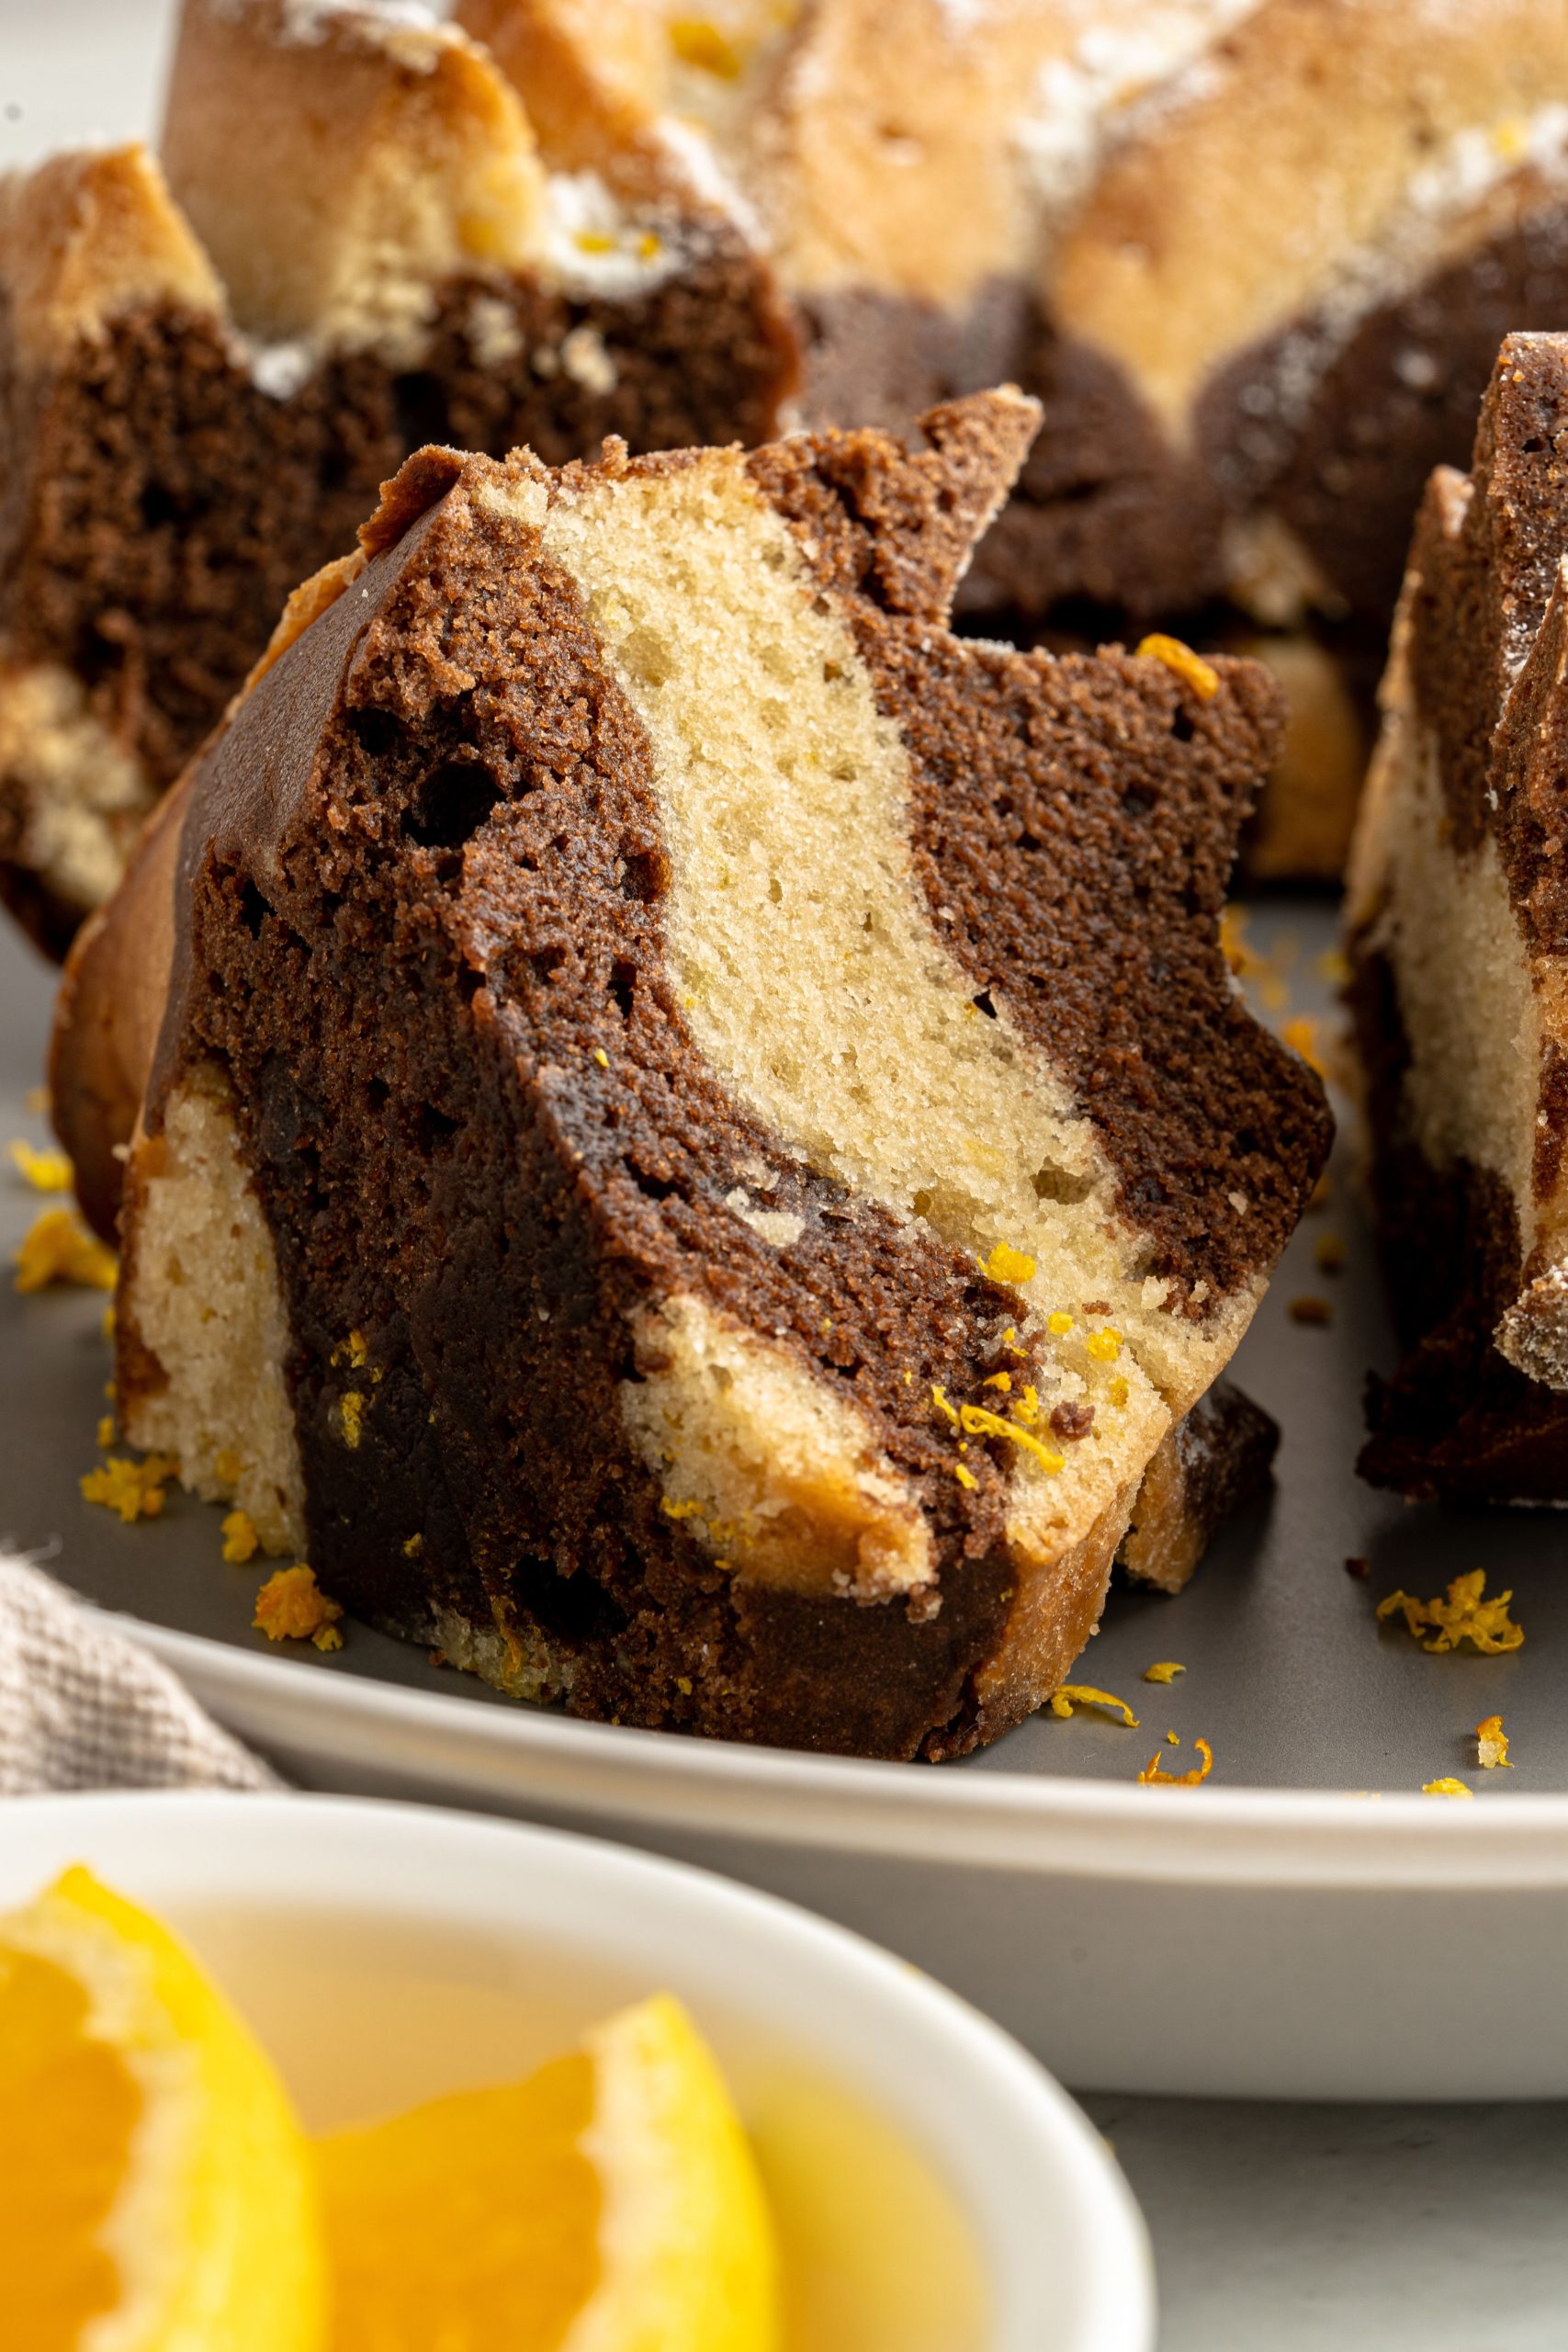 This Vegan Orange and Chocolate Marble Cake is moist and full of flavor. This vegan marble cake is the perfect dessert. Dust with some powdered sugar and enjoy with a cup of coffee.